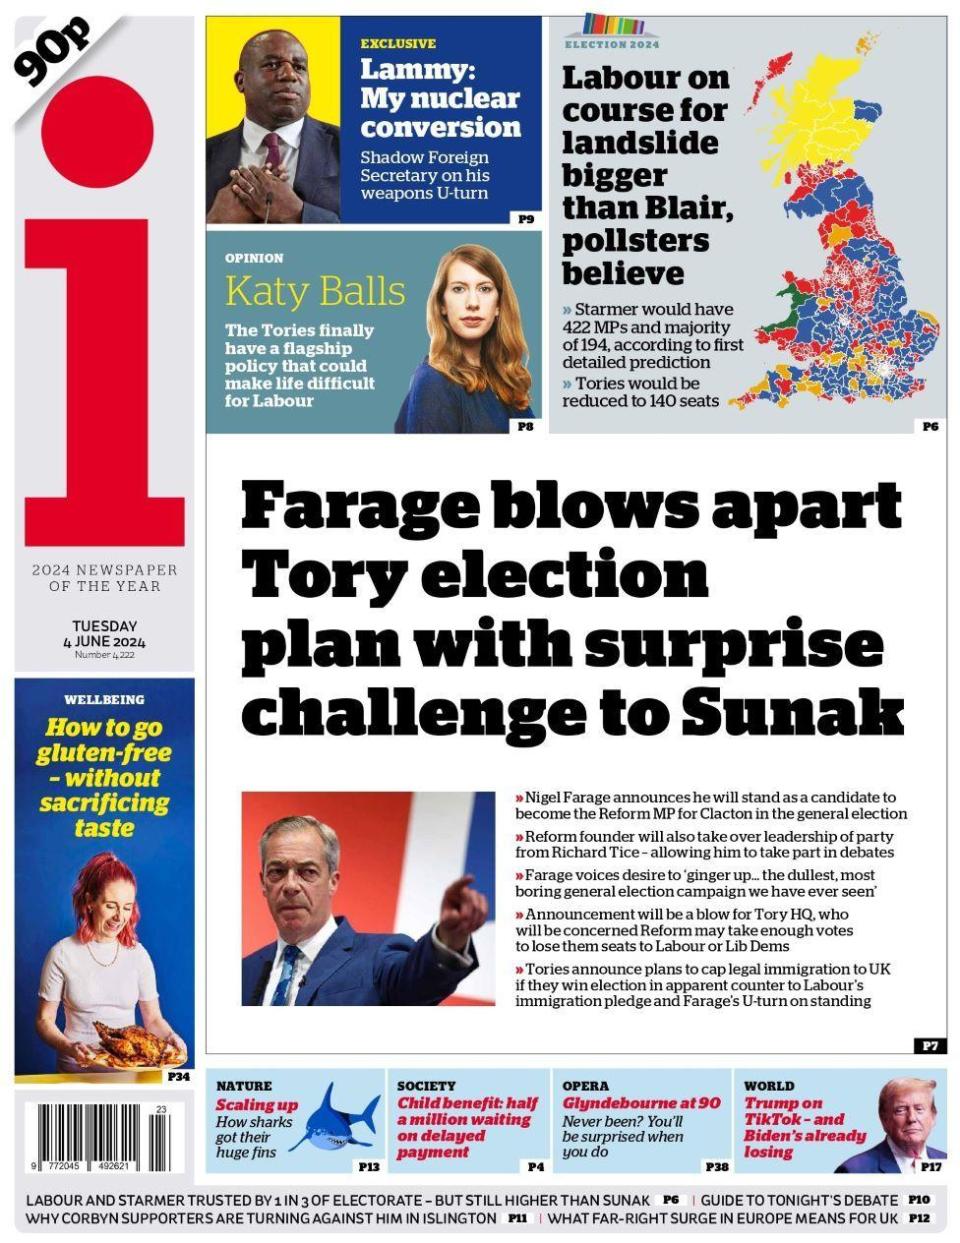 "Farage blows apart Tory election plan, the i paper reports 